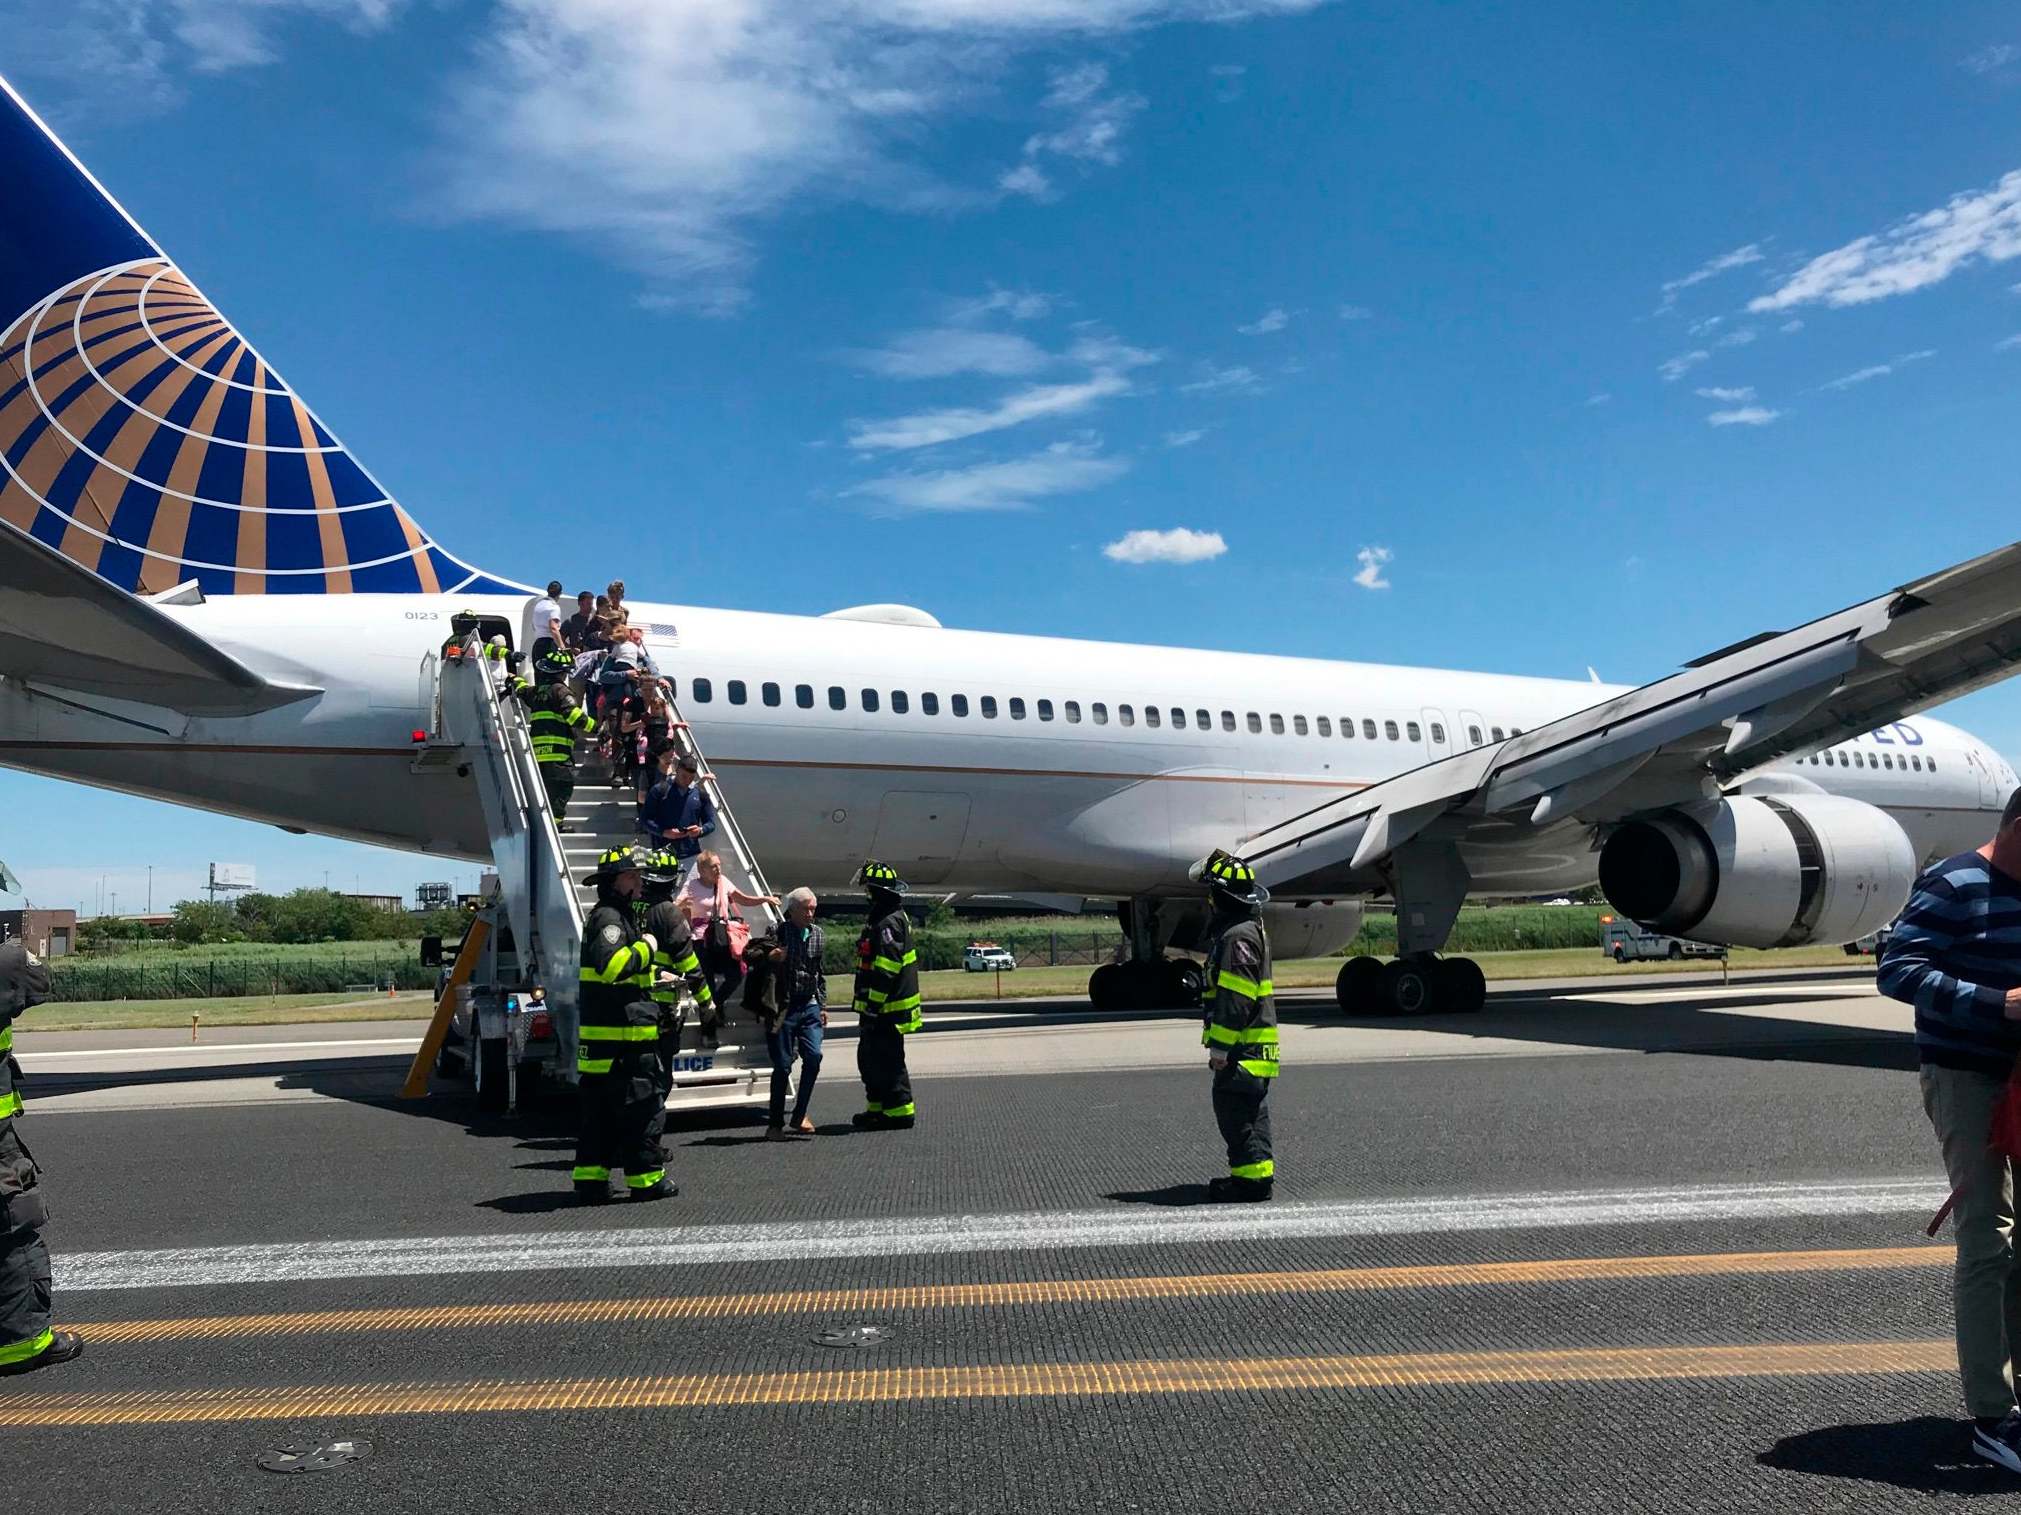 United Airlines plane skids off runway after tyres burst on landing at New York airport